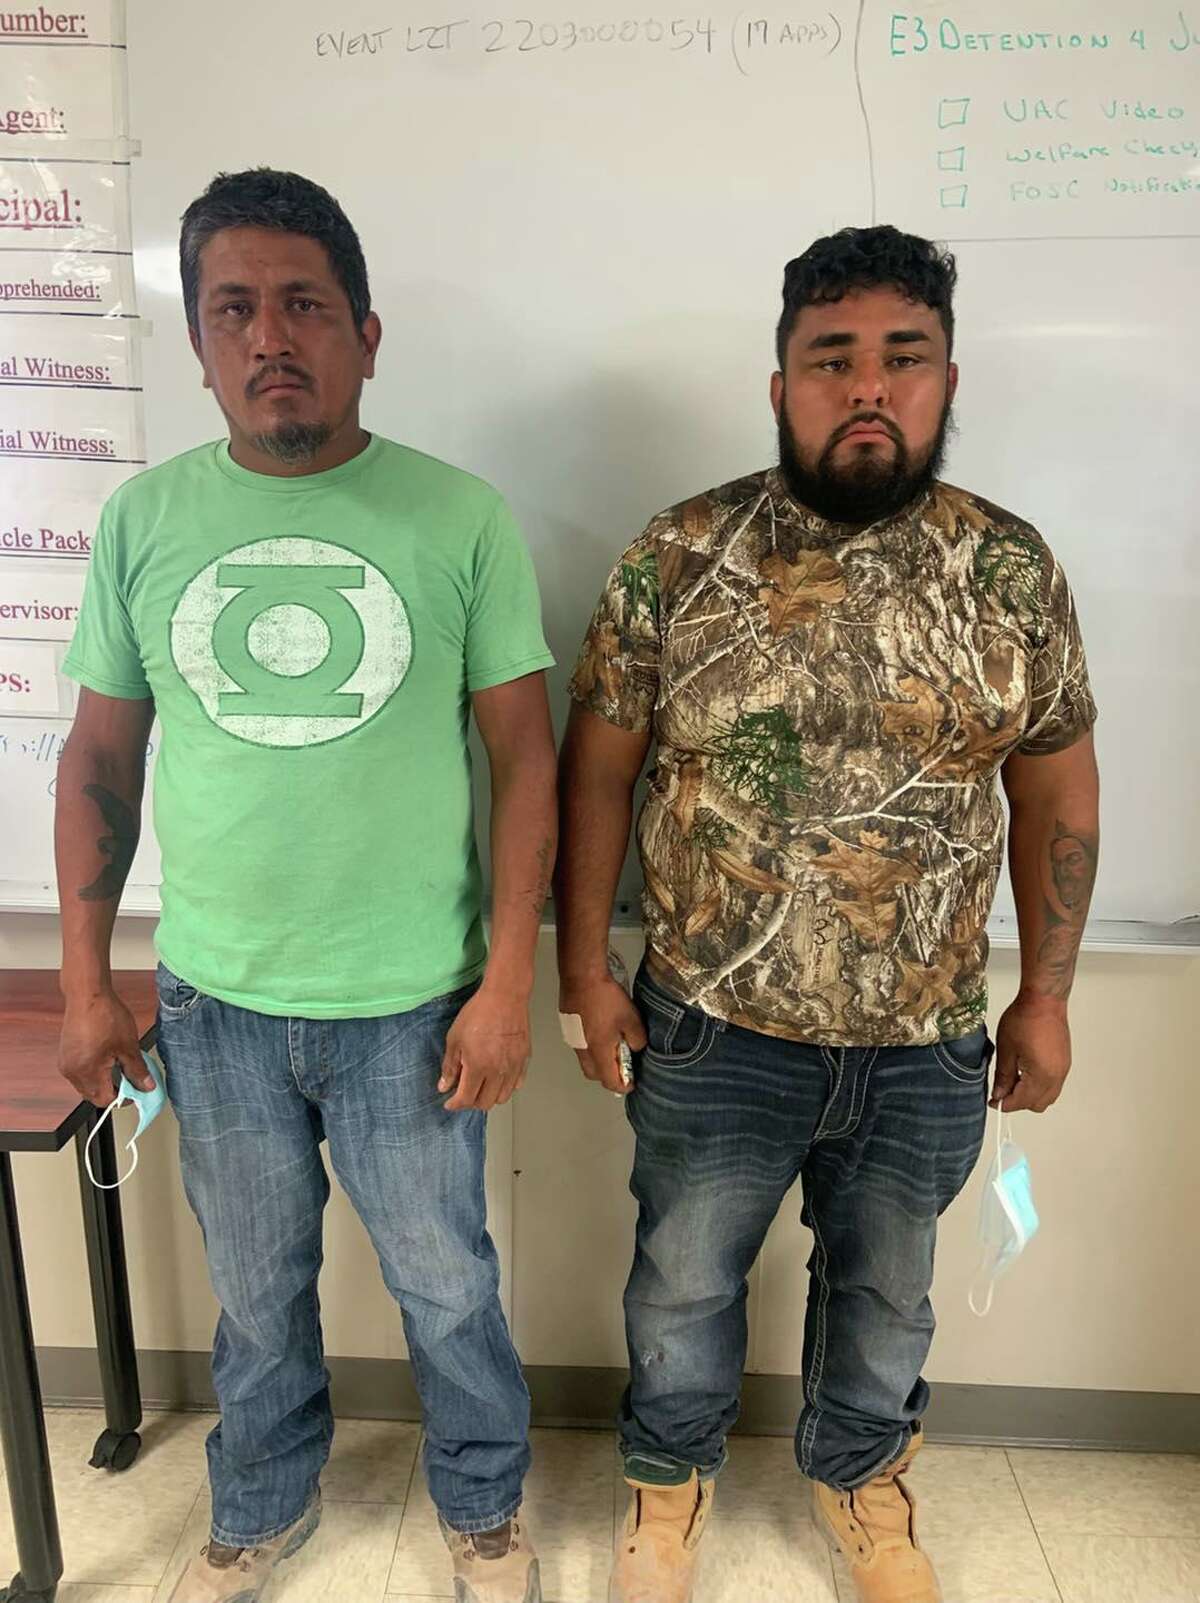 A combined law enforcement effort led to the rescue of these two migrants who were lost in the San Ygnacio area.